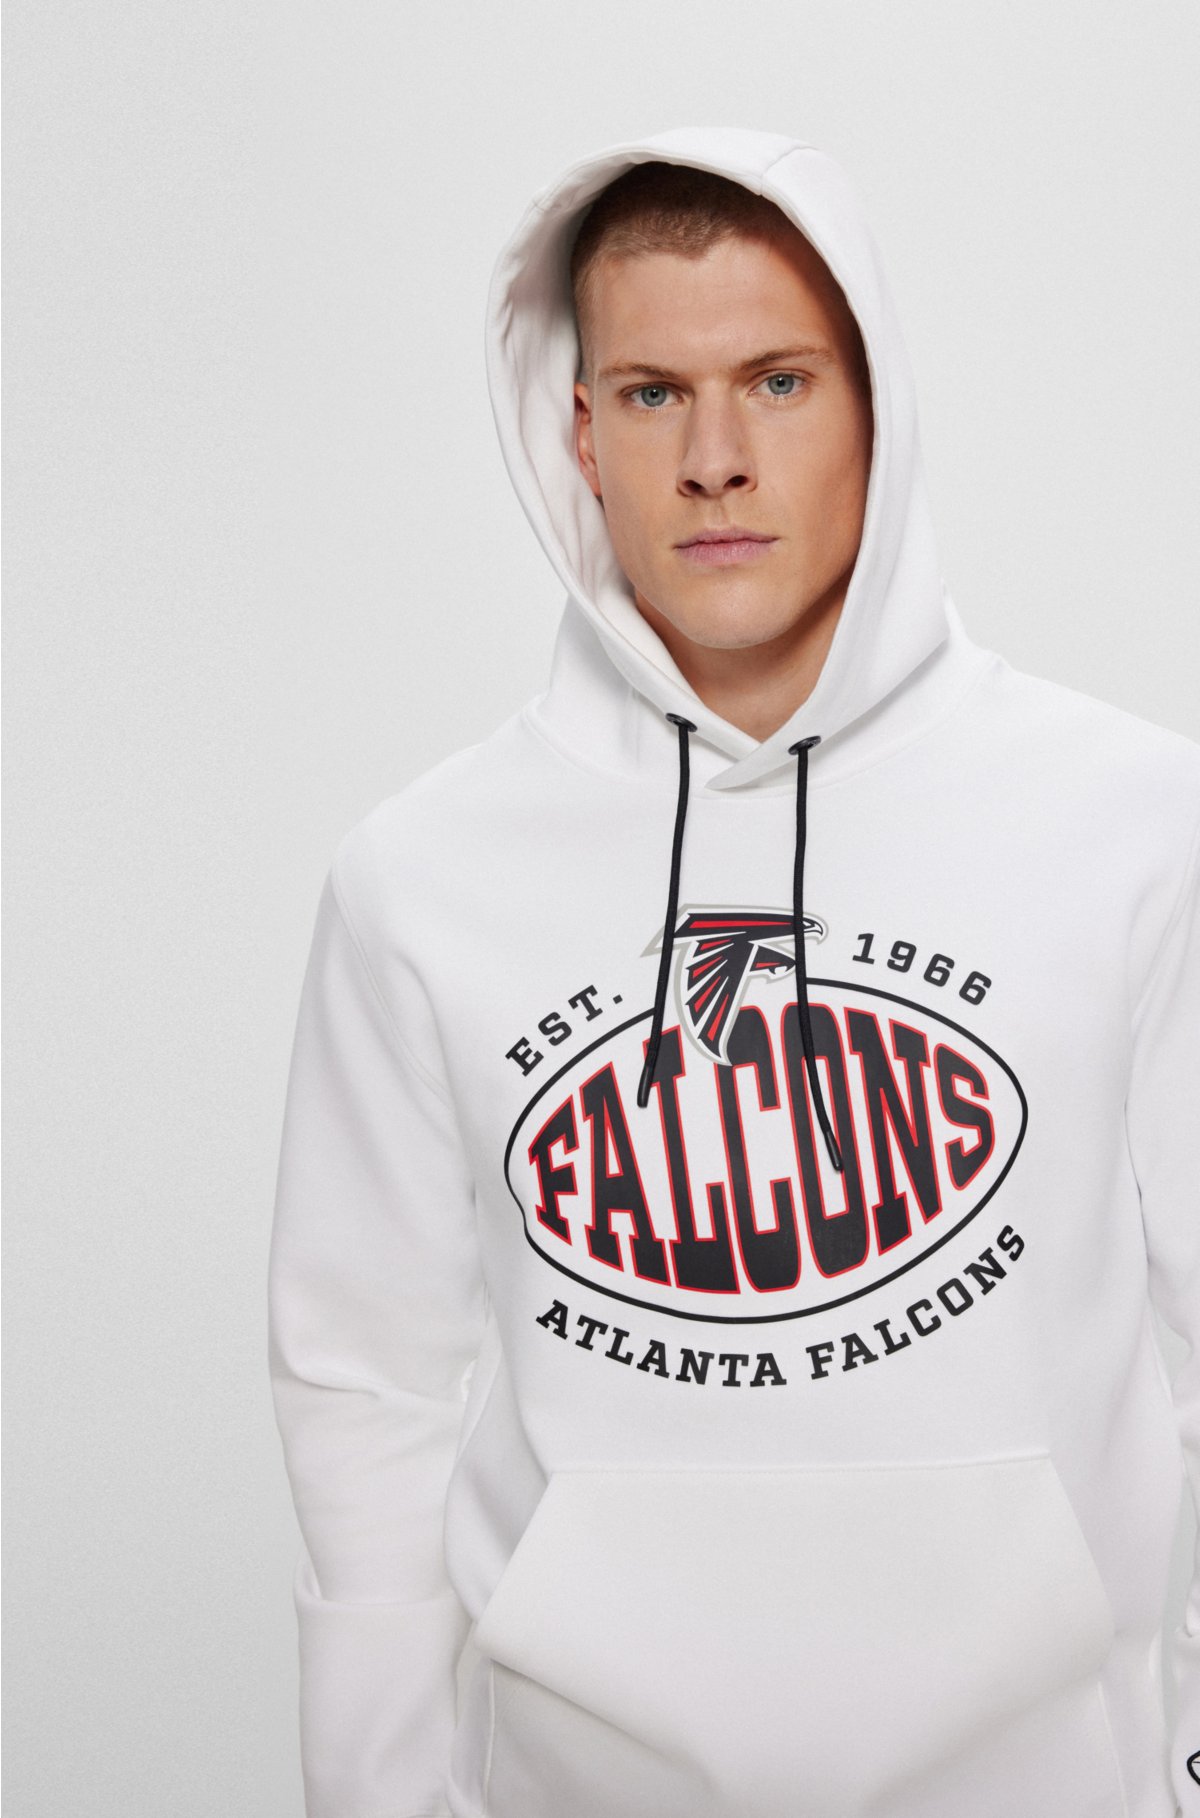  BOSS x NFL cotton-blend hoodie with collaborative branding, Falcons